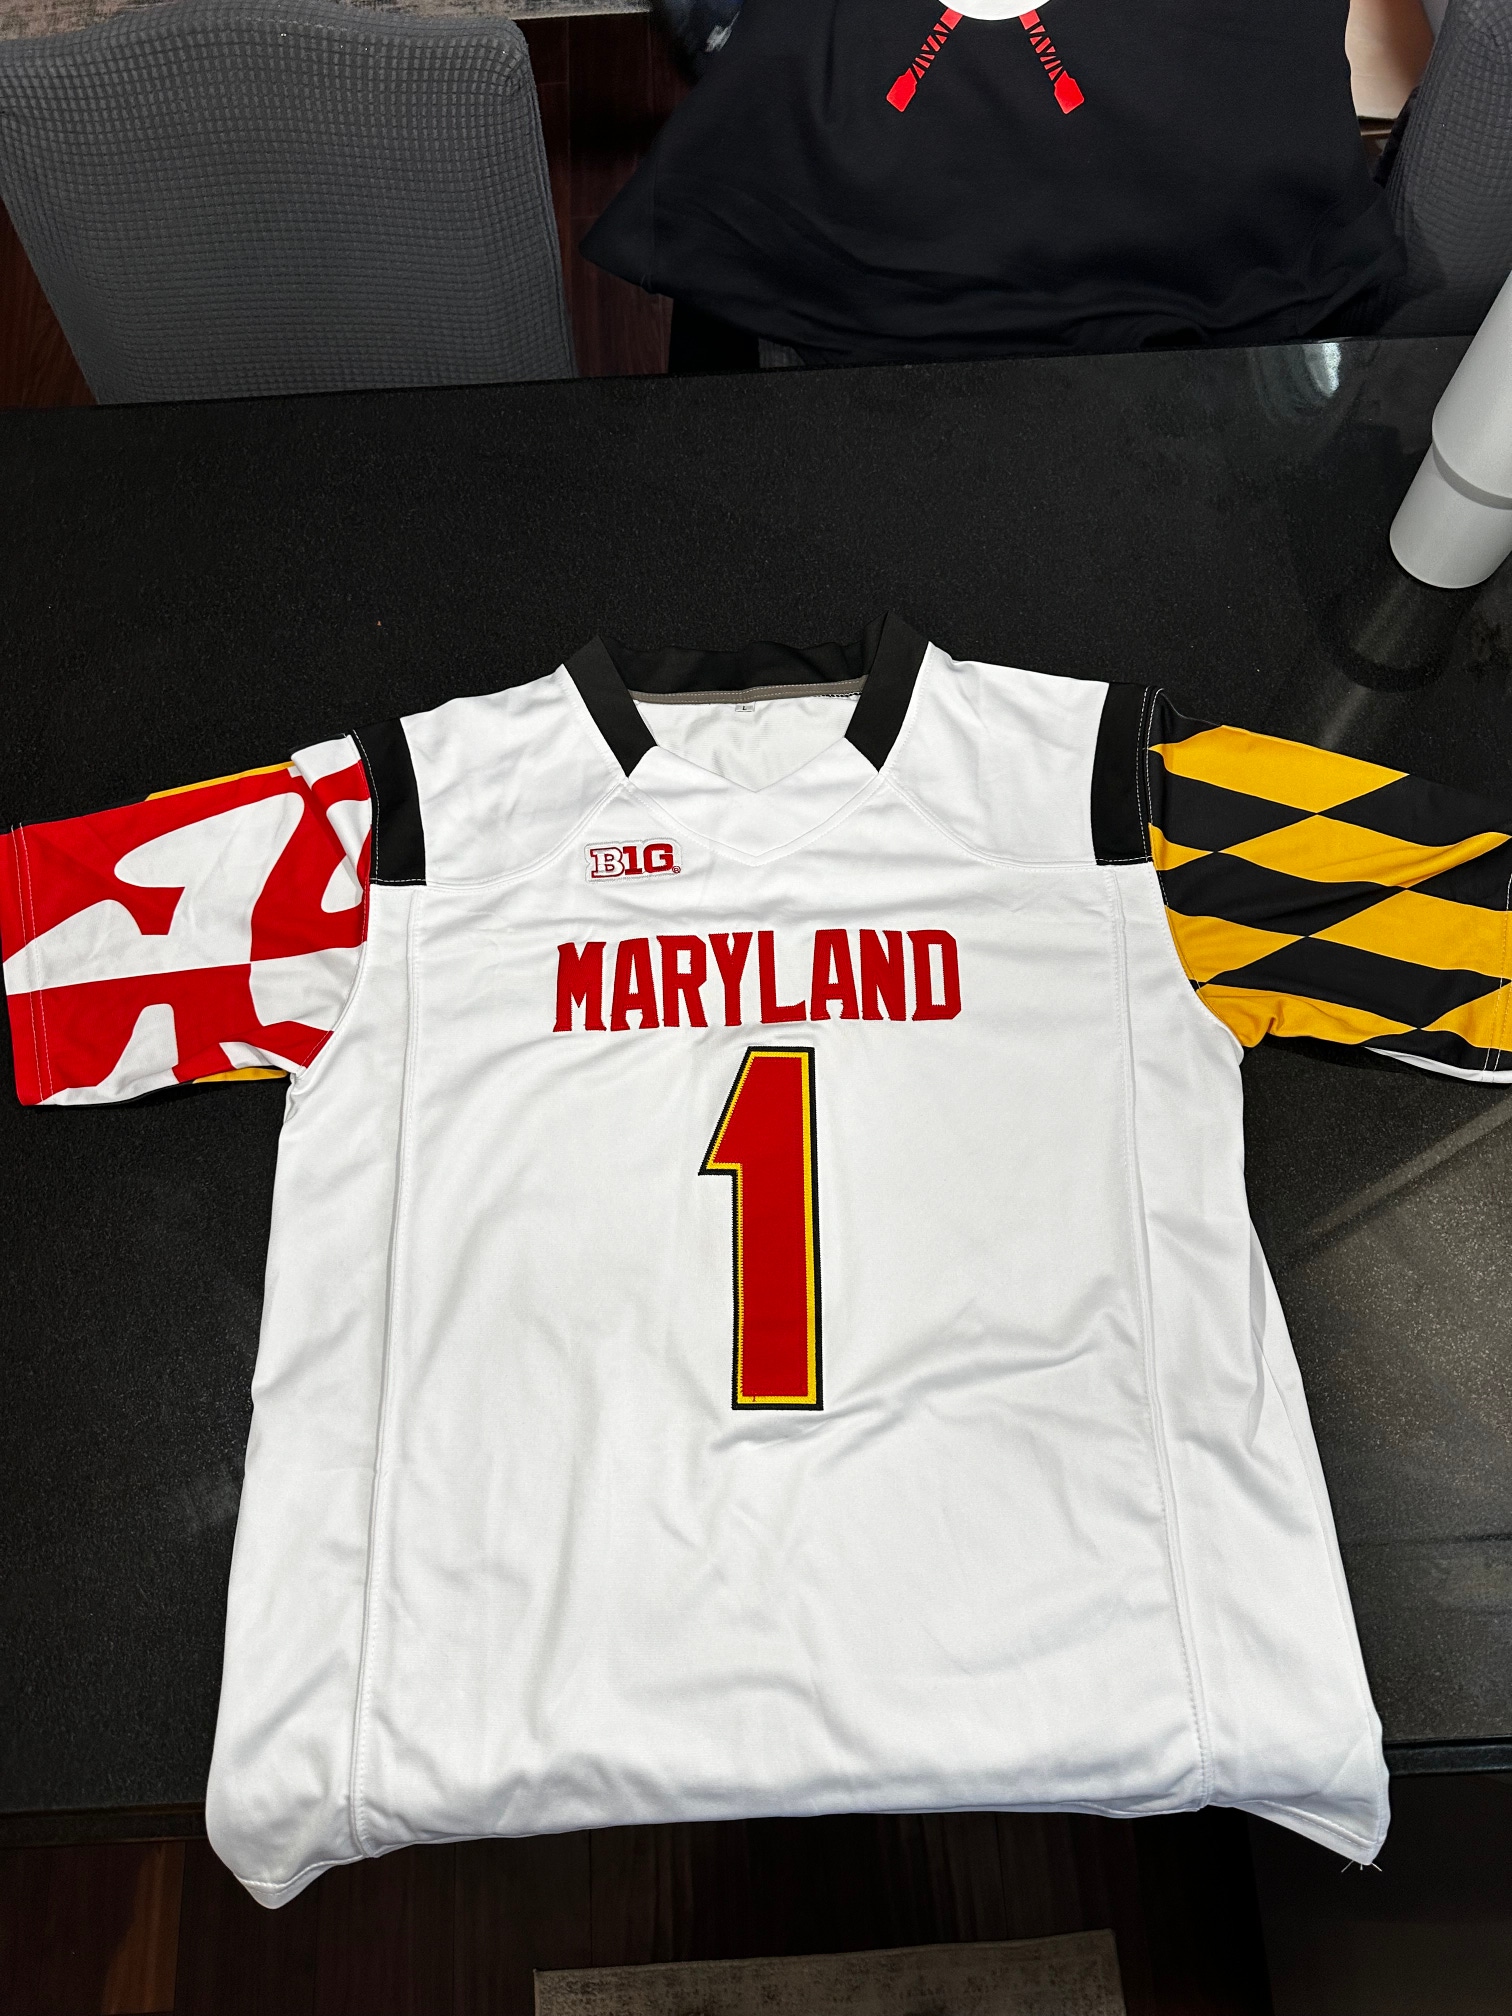 Stefon Diggs - Maryland Football Jersey - Size L